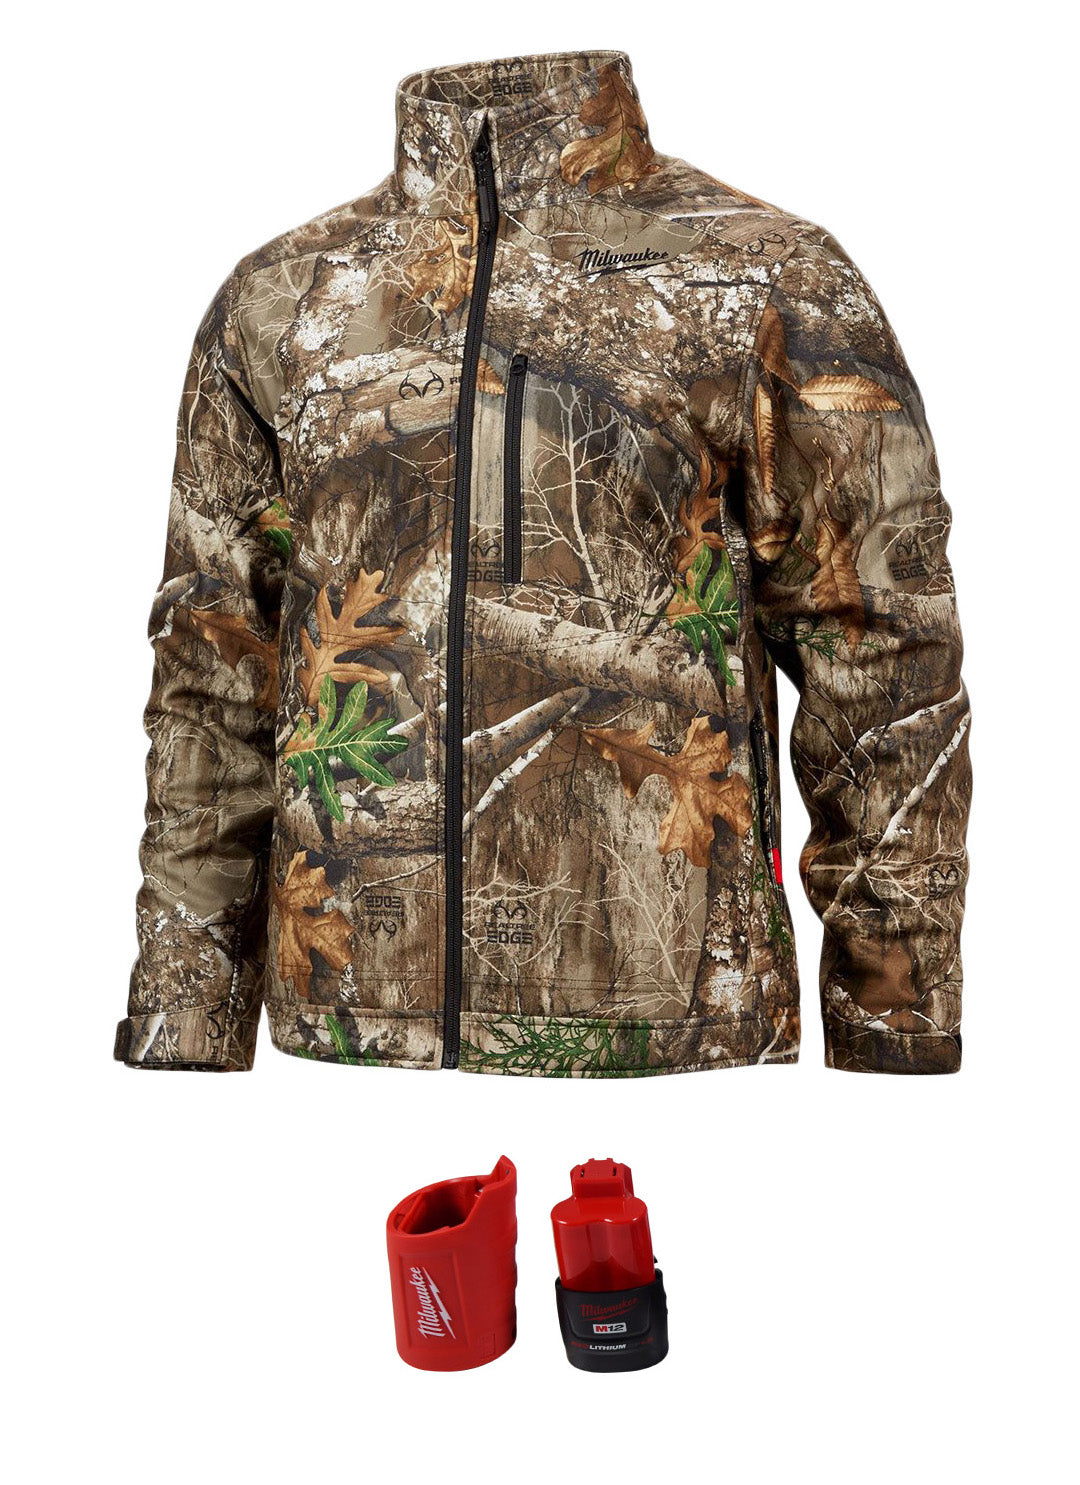 Milwaukee-224C-21L-M12-Lithium-Ion-QUIETSHELL-Camo-Heated-Jacket-Kit-with-Battery-Large-image-1